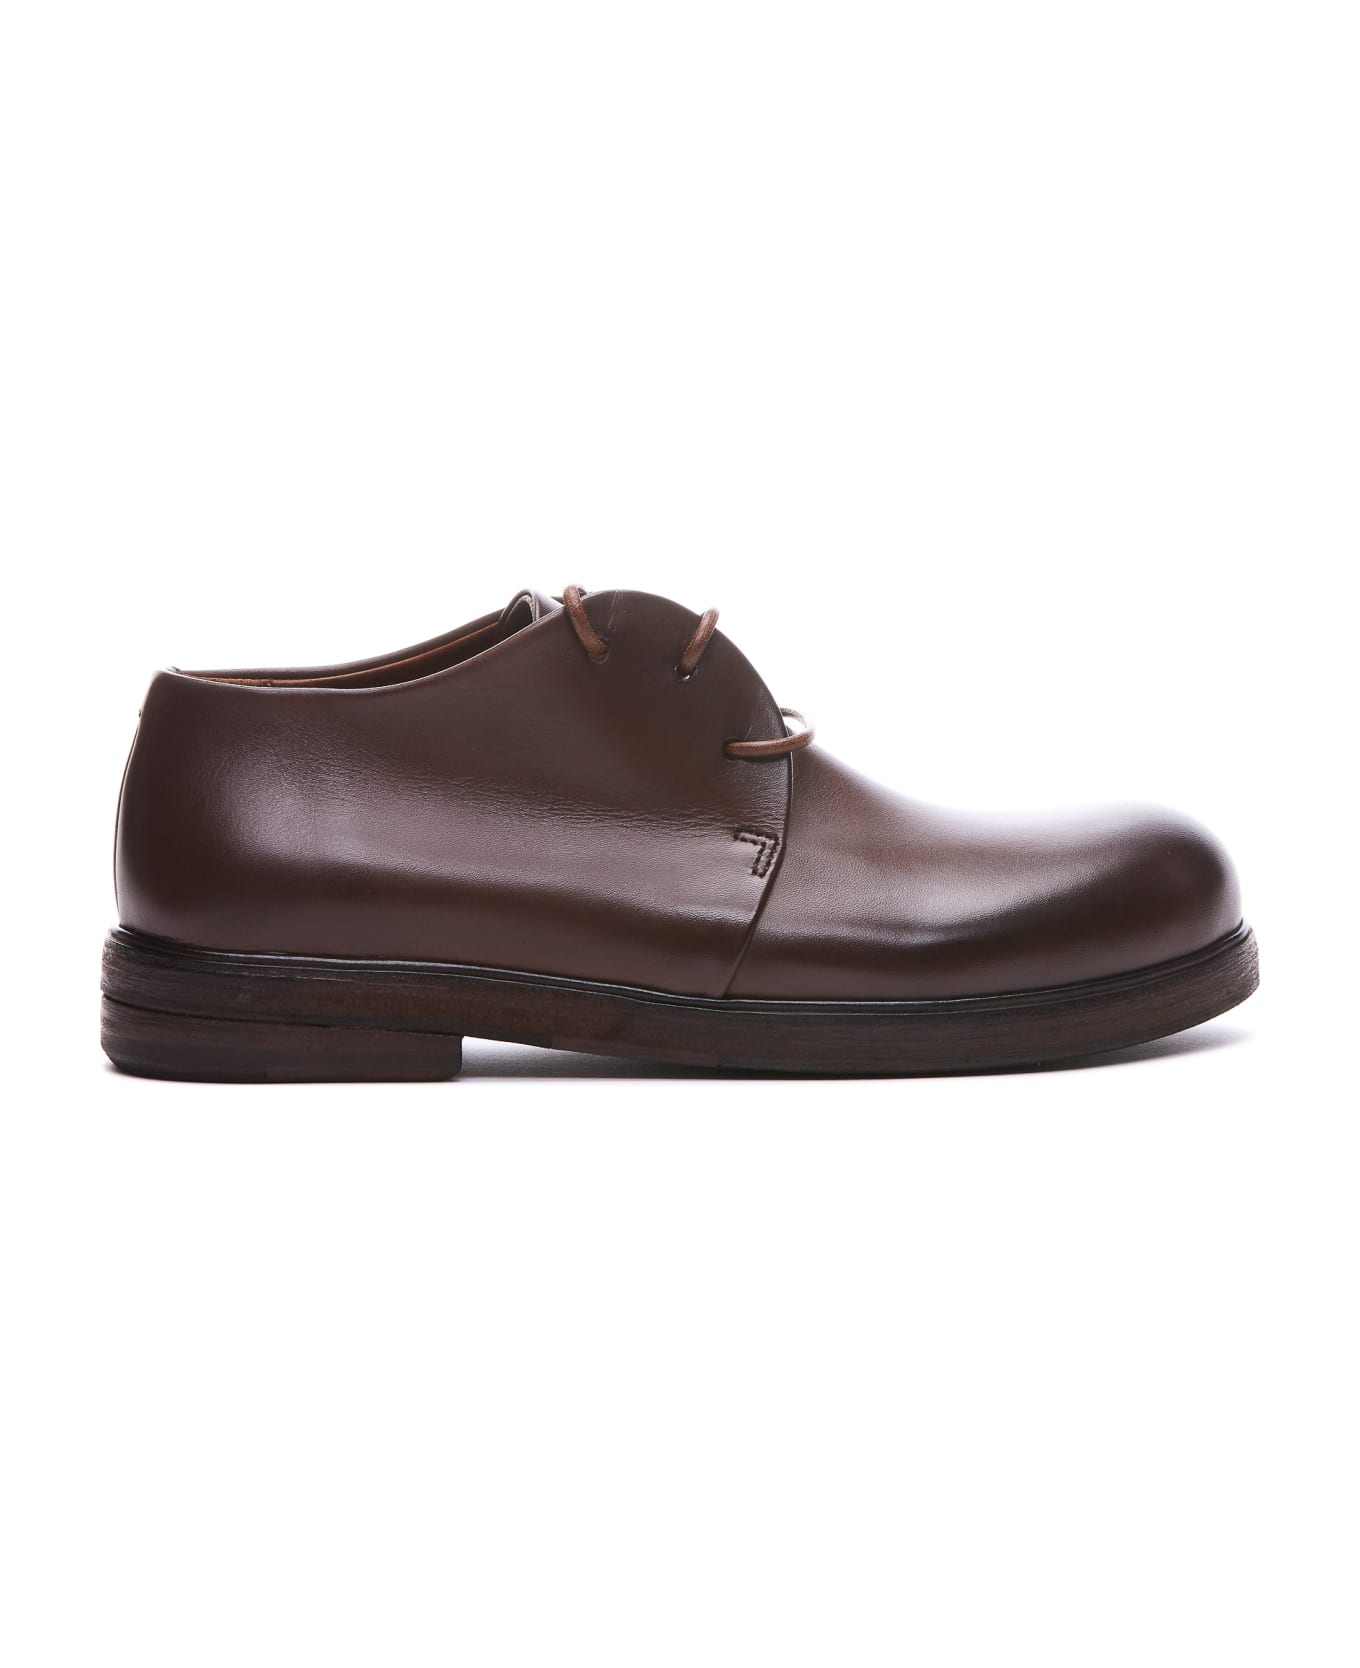 Marsell Zucca Derby Lace Up Shoes - Brown